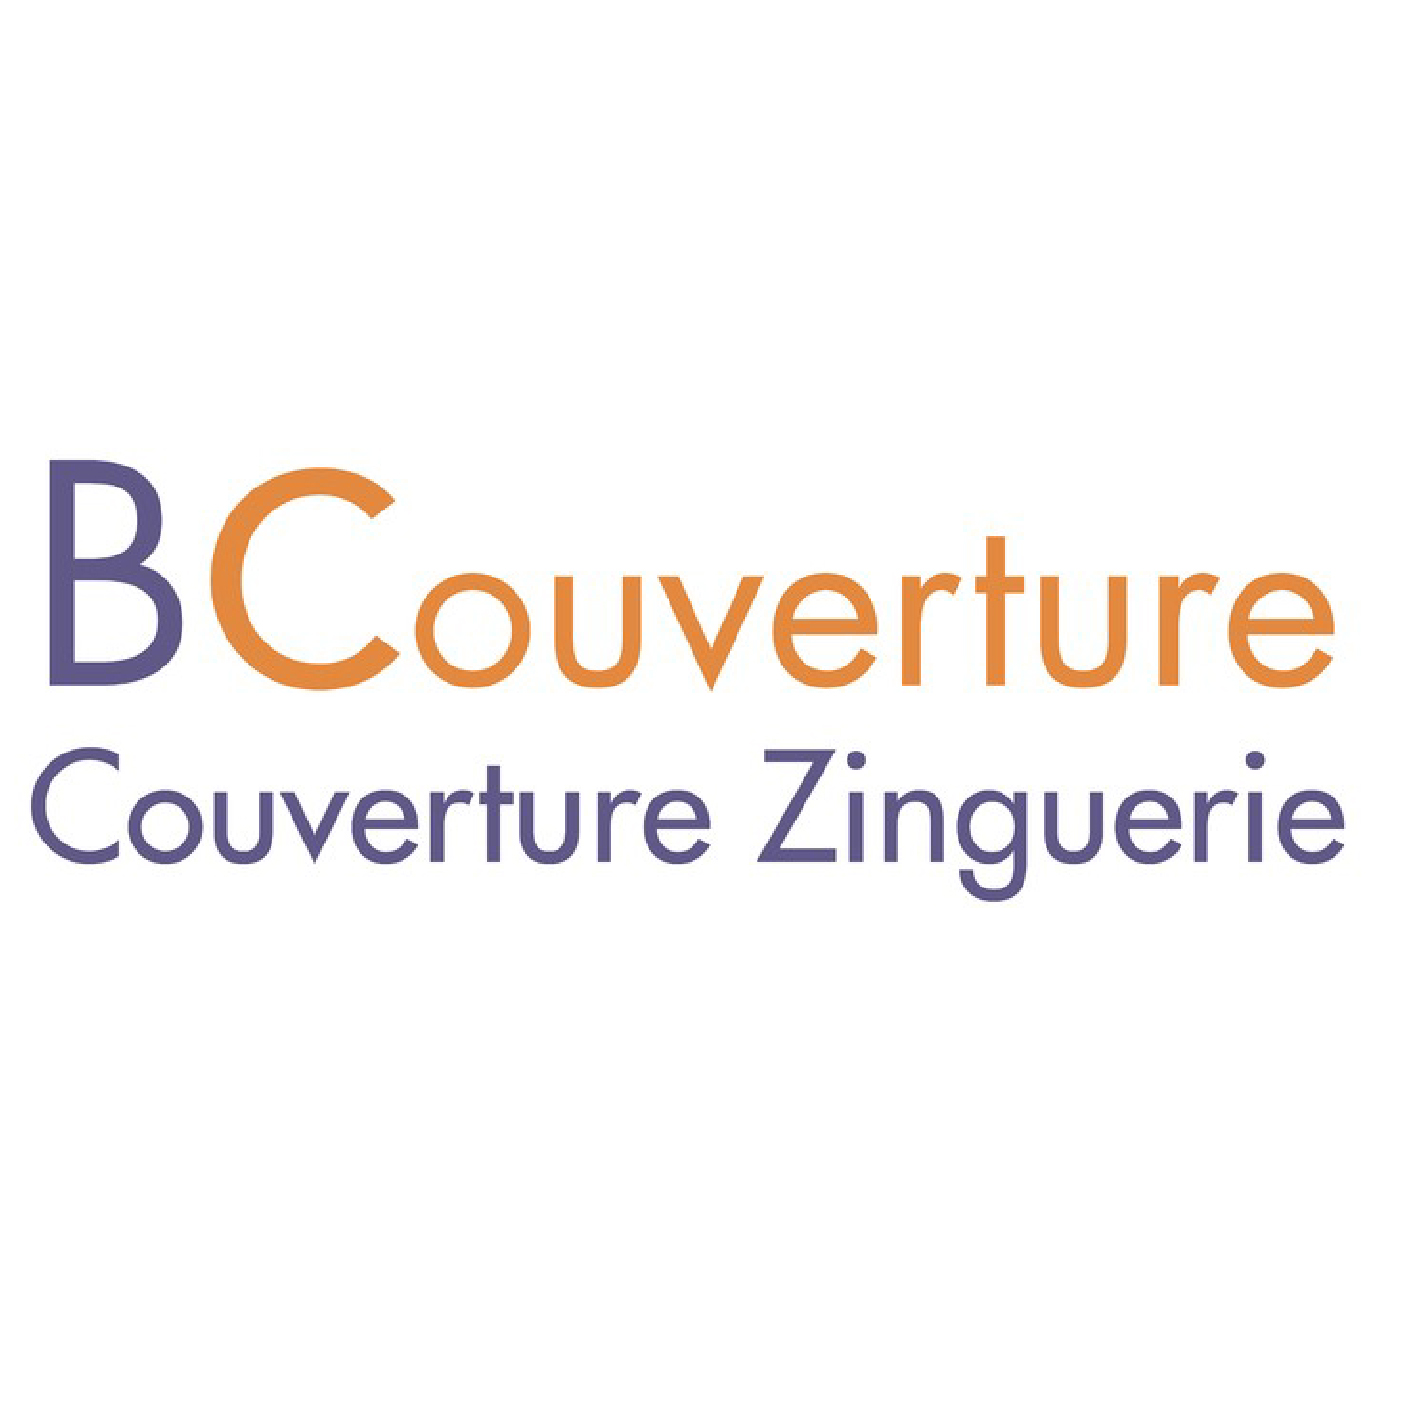 You are currently viewing Bourdieu Couverture